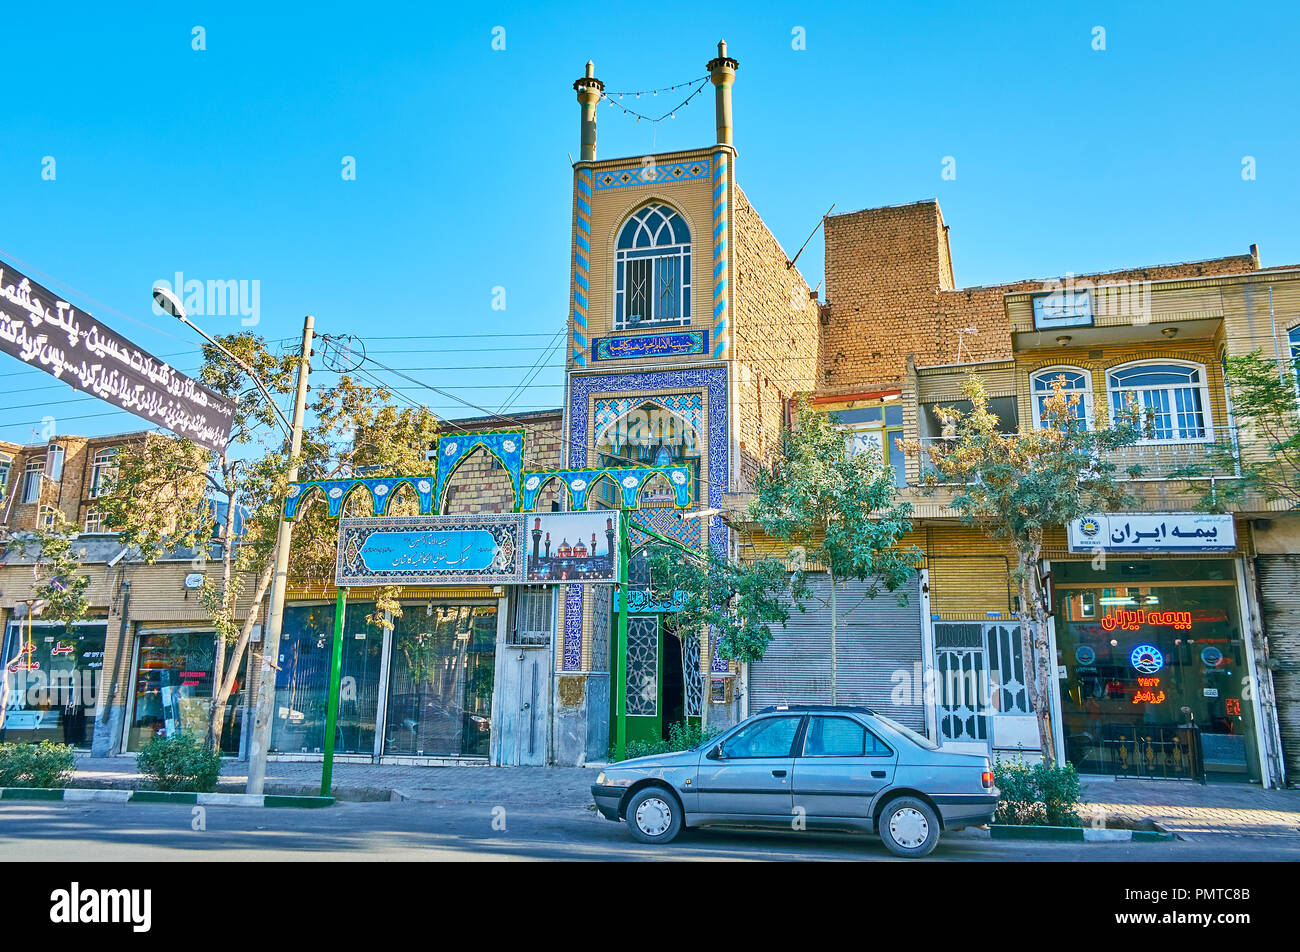 KASHAN, IRAN - OCTOBER 22, 2017: The narrow building with two tiny minarets and Islamic pattern of blue tile is Imam Hussein Hidayet Hussainiya, locat Stock Photo